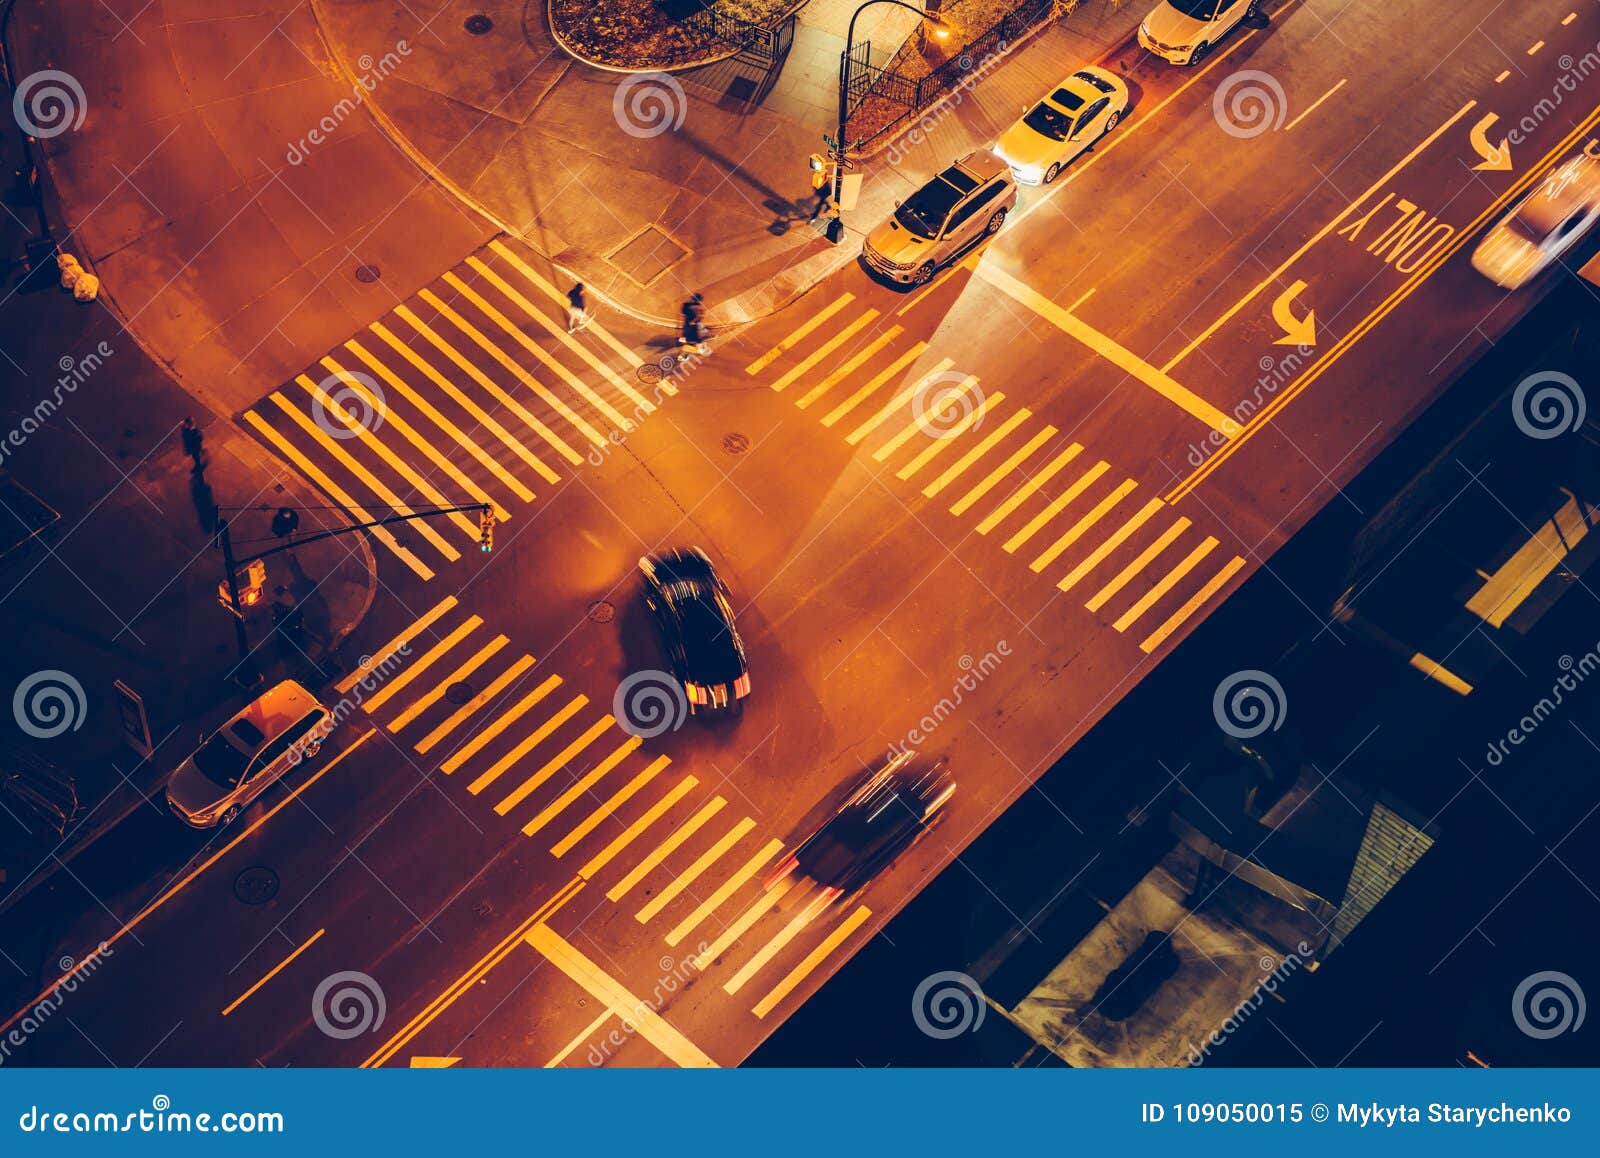 cars and people on road intersection with signal lights and crosswalks at night time in the city street.